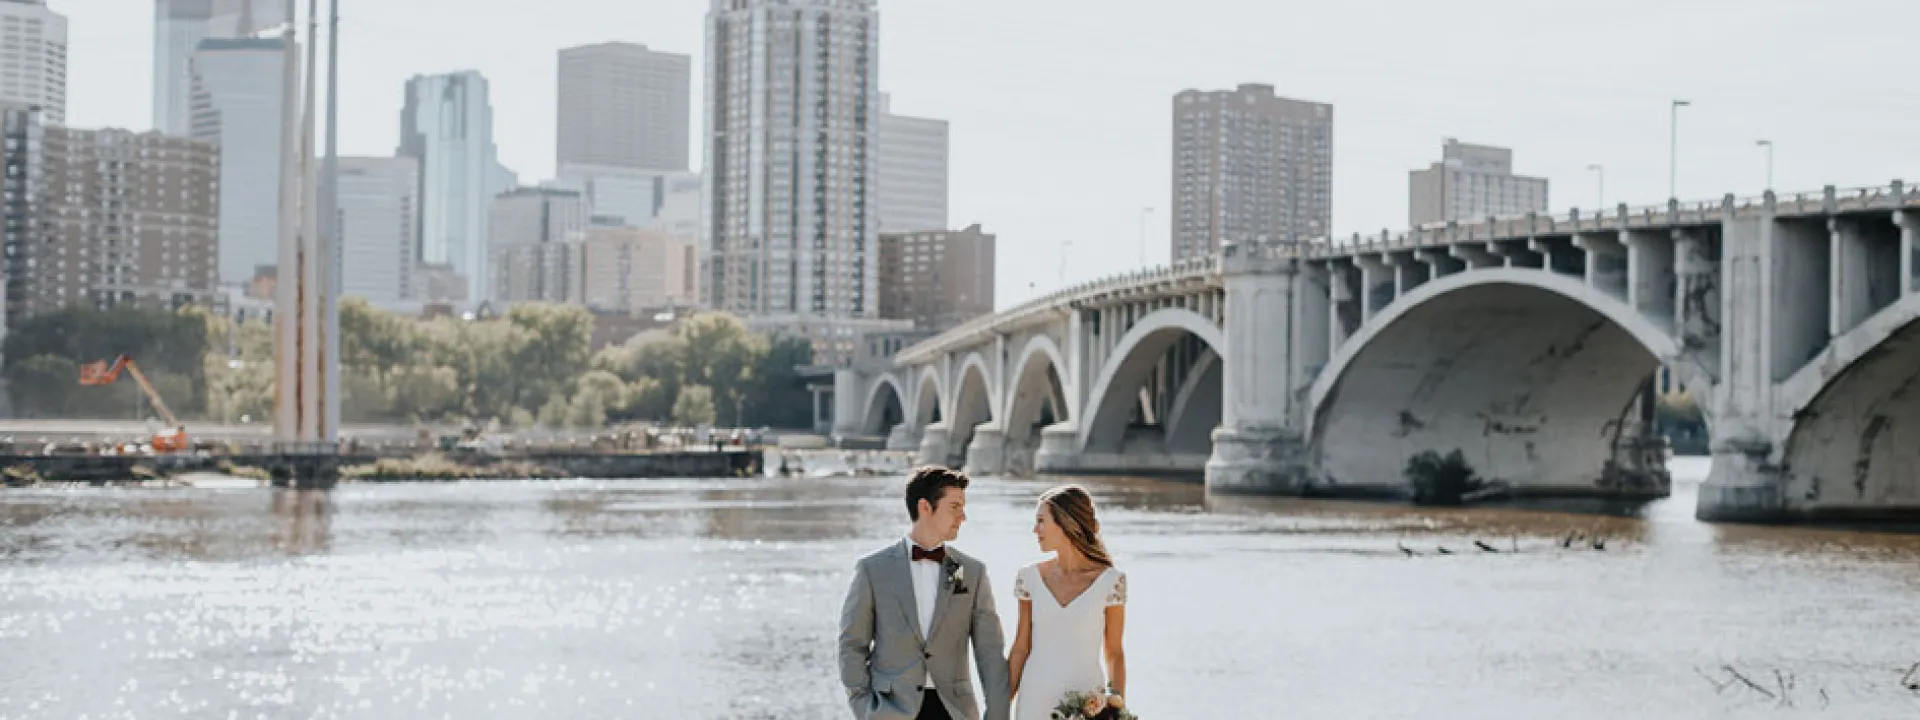 Kelsey and Grant stand before the Stone Arch Bridge